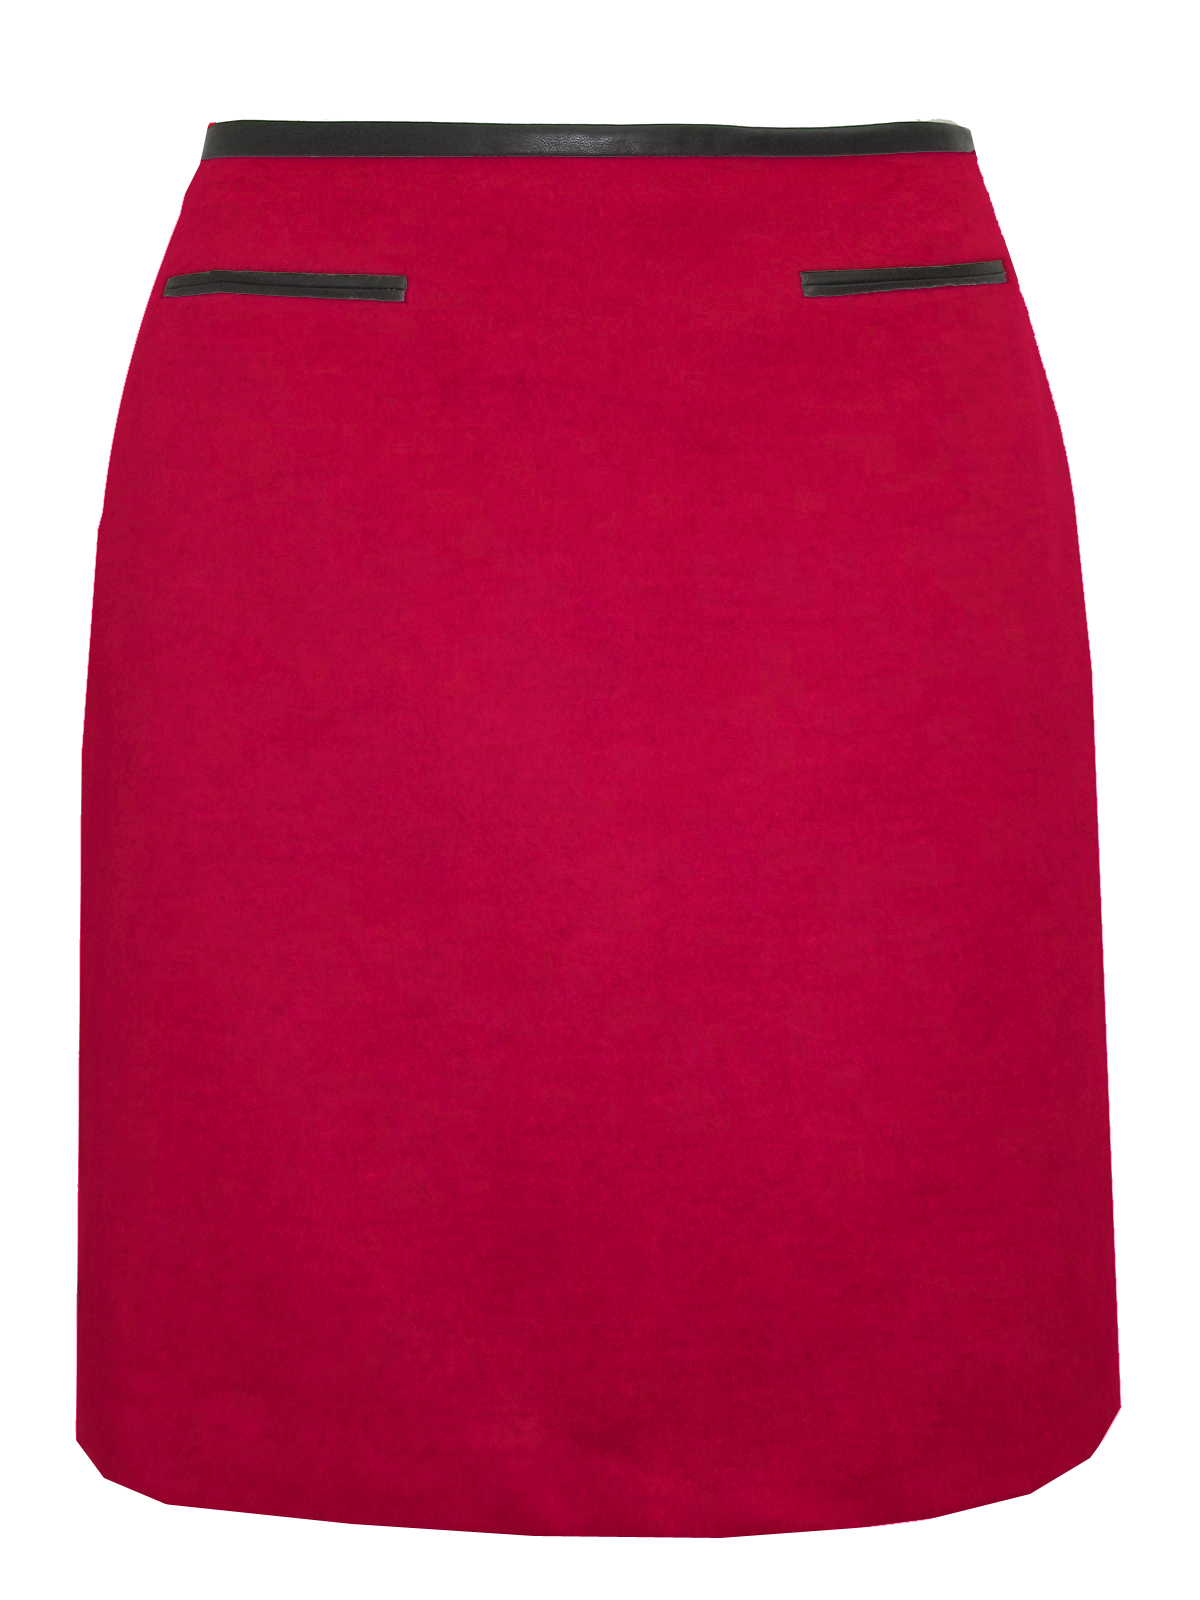 Marks and Spencer - - M&5 RED Faux Leather Trim Mini Skirt w/Wool ...